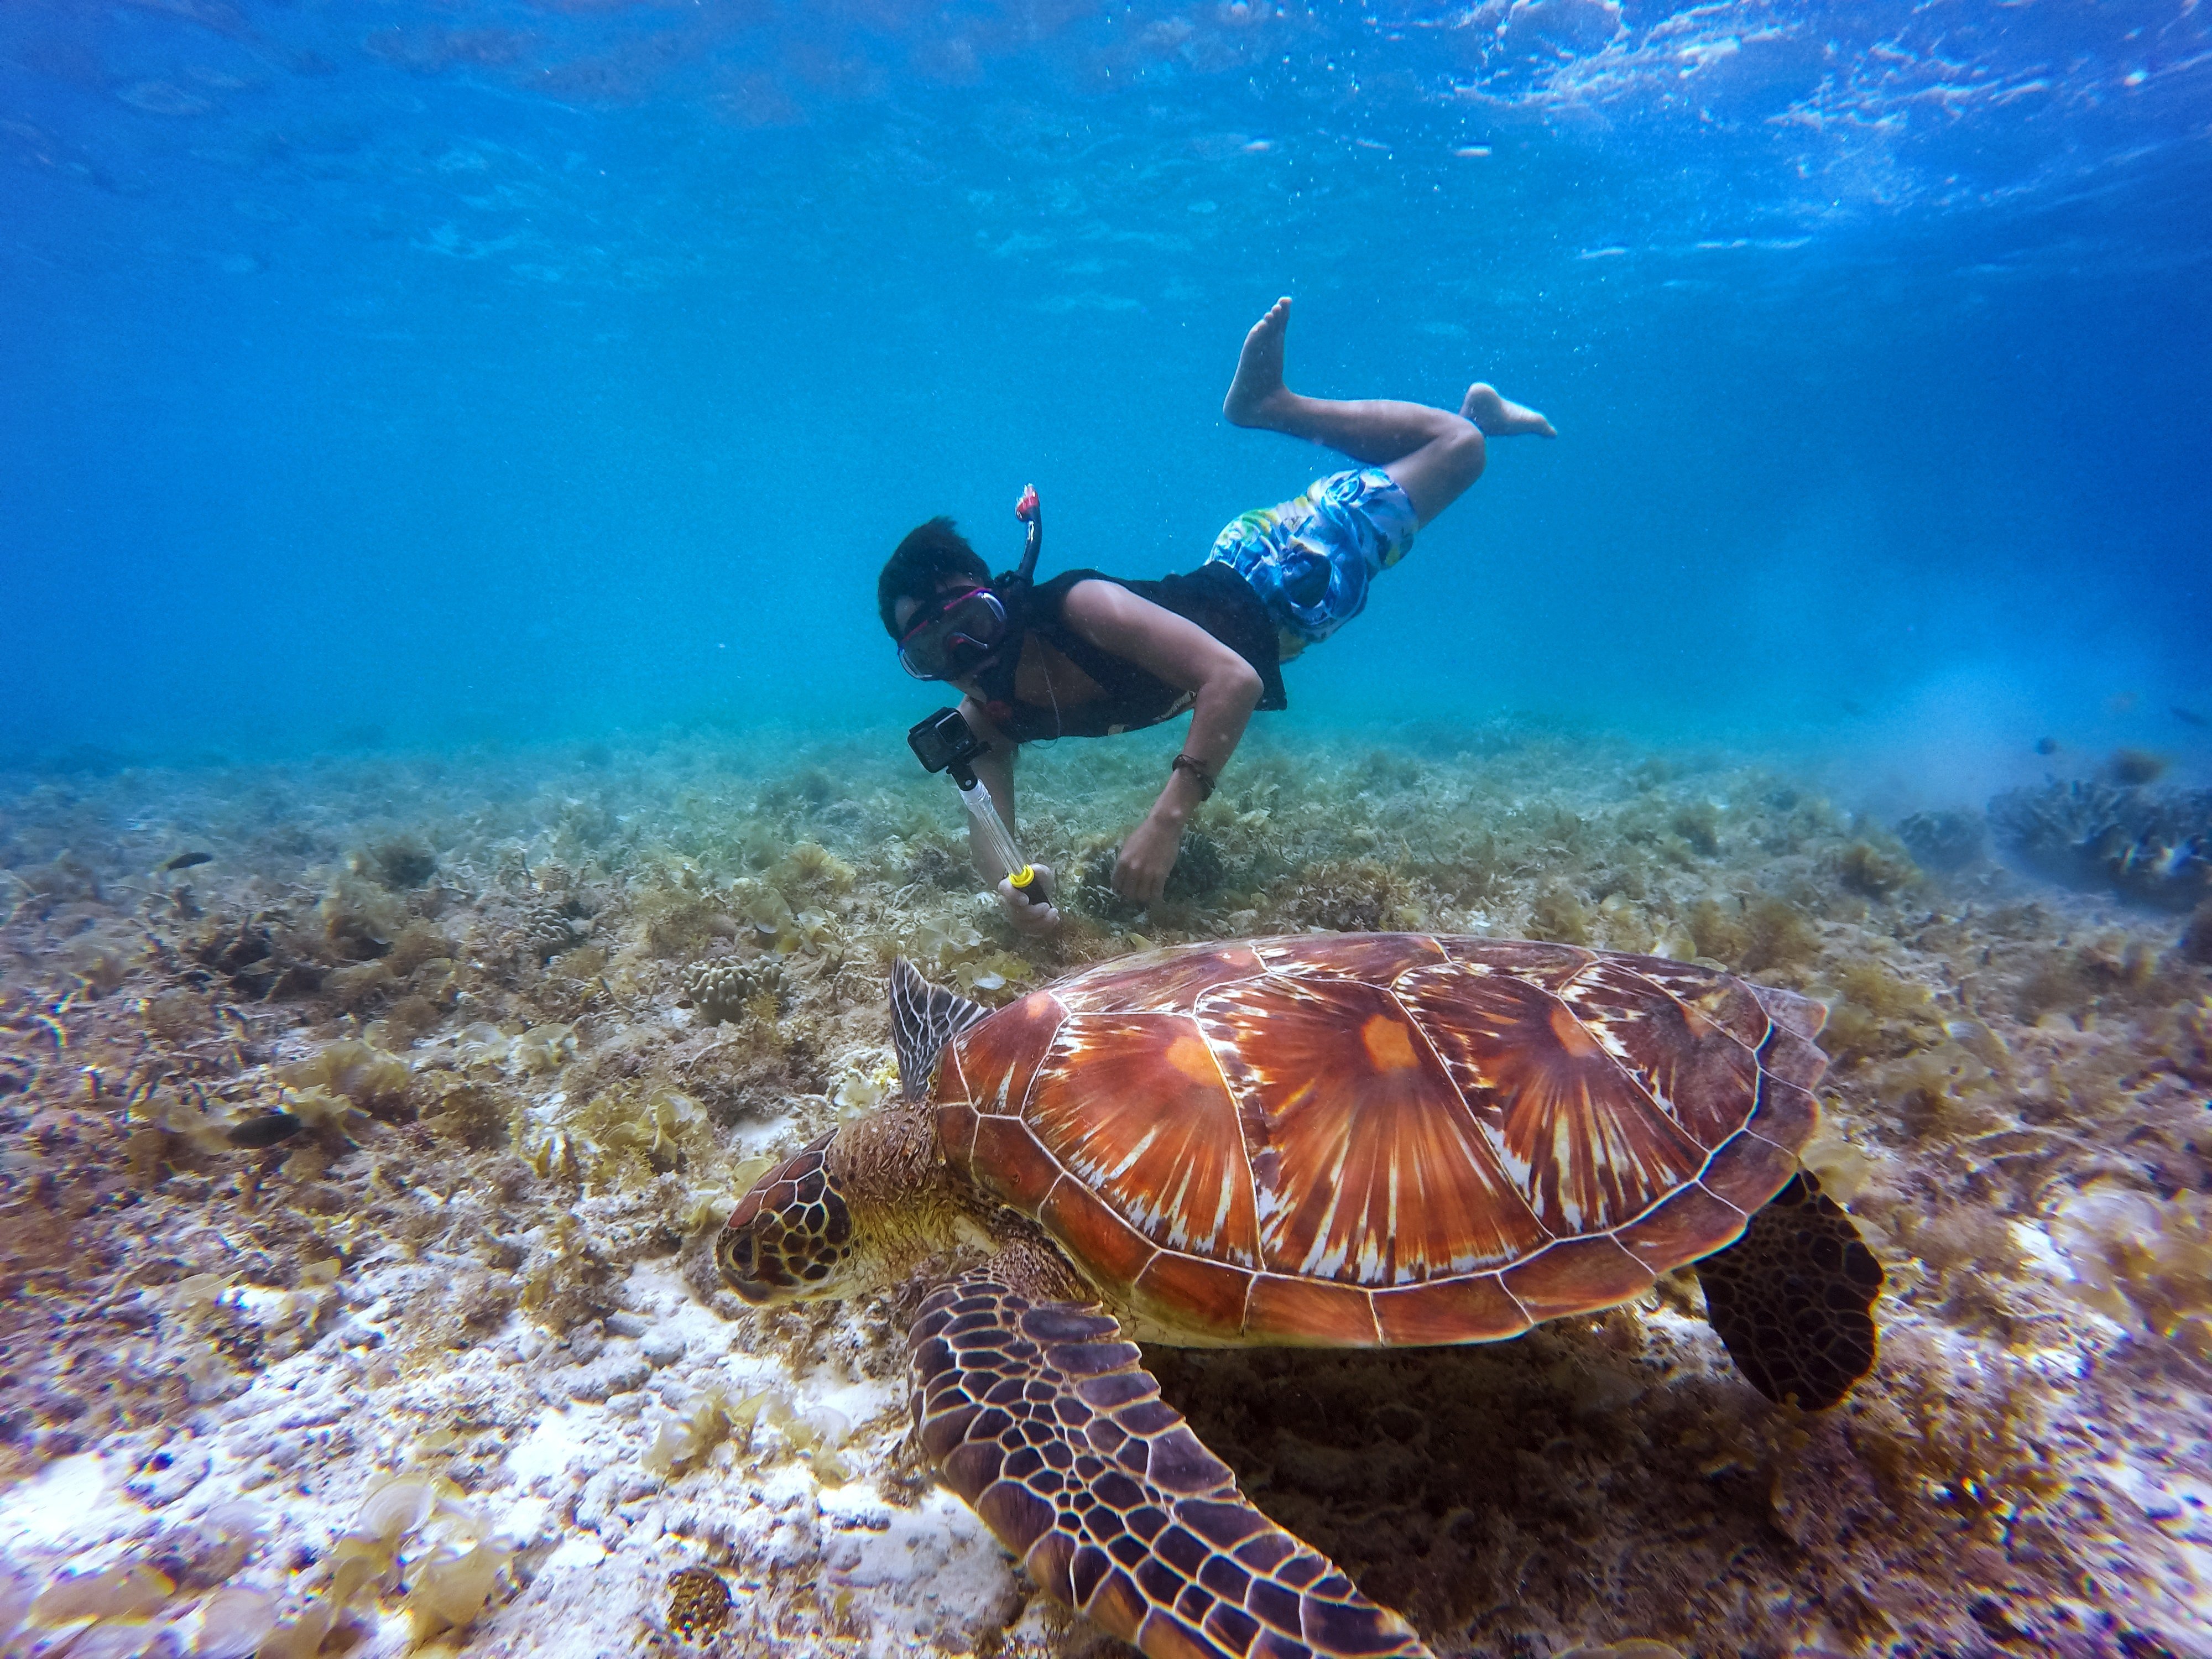 Pictured - A man snorkeling and taking a video of a brown tortoise in a body of water | Source: Pexels 